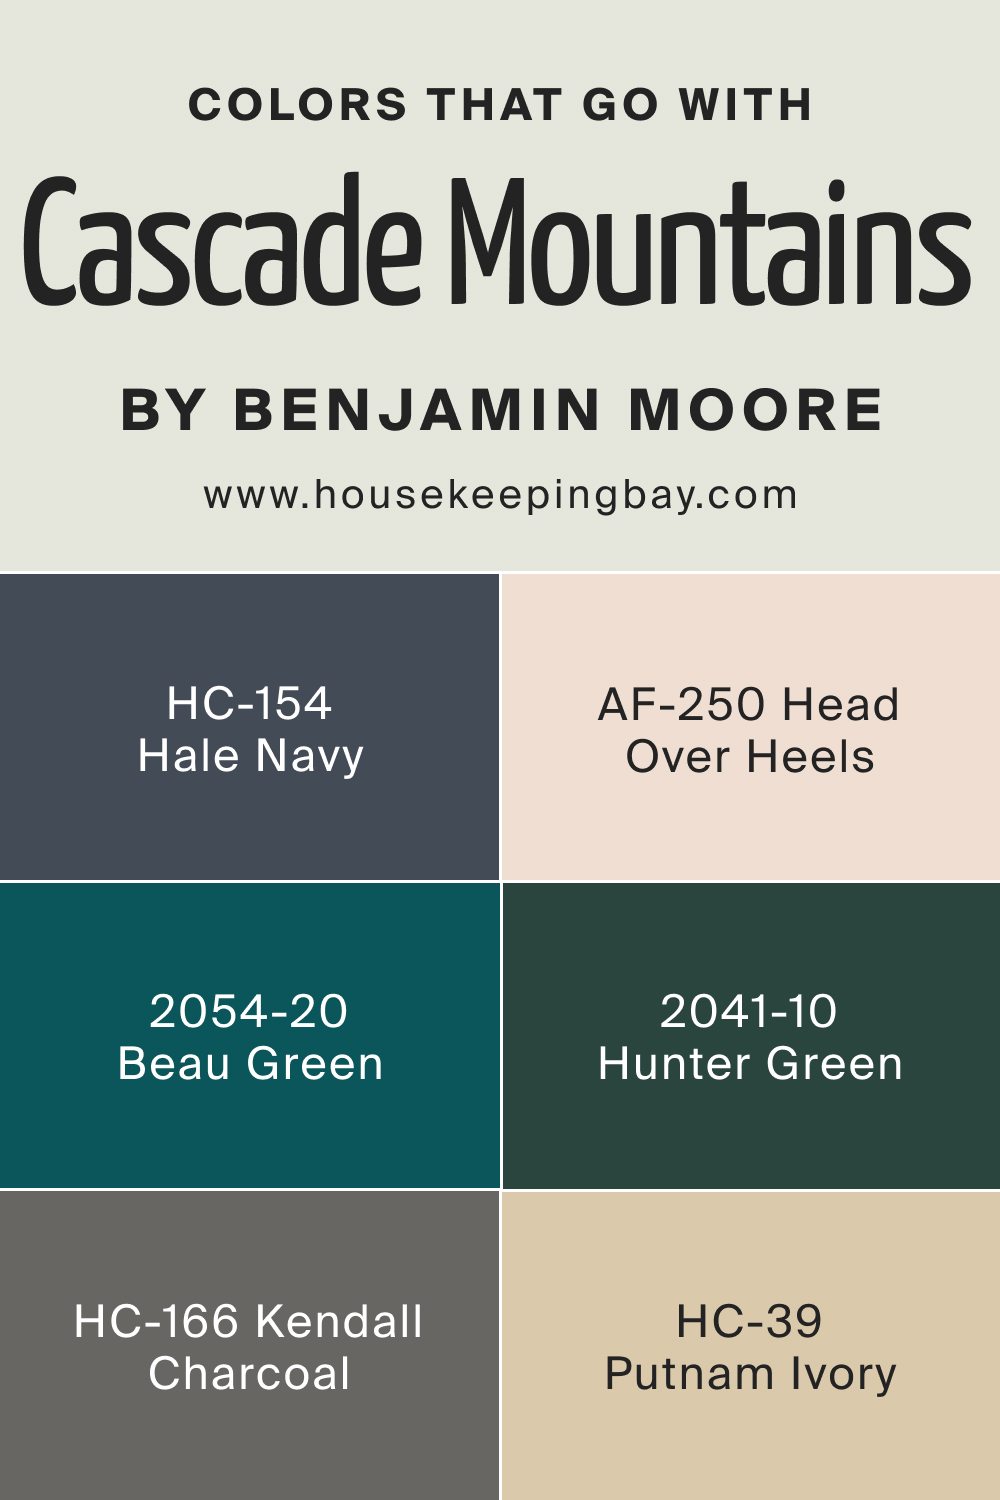 Colors by That Go With BM Cascade Mountains 862